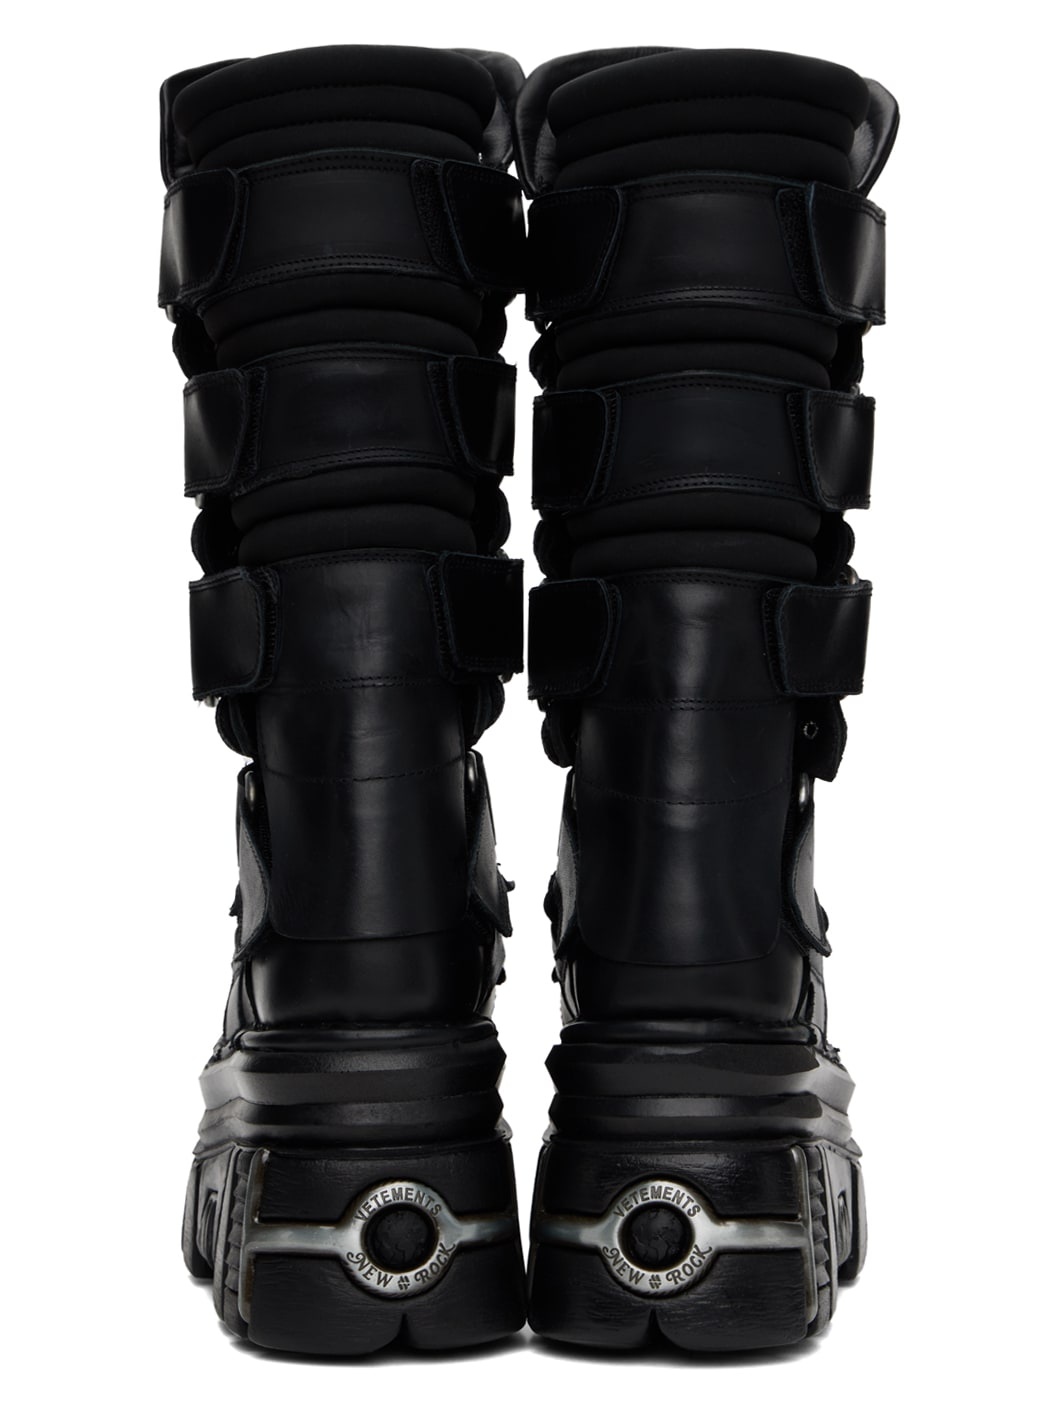 Black New Rock Edition Tower Boots - 2